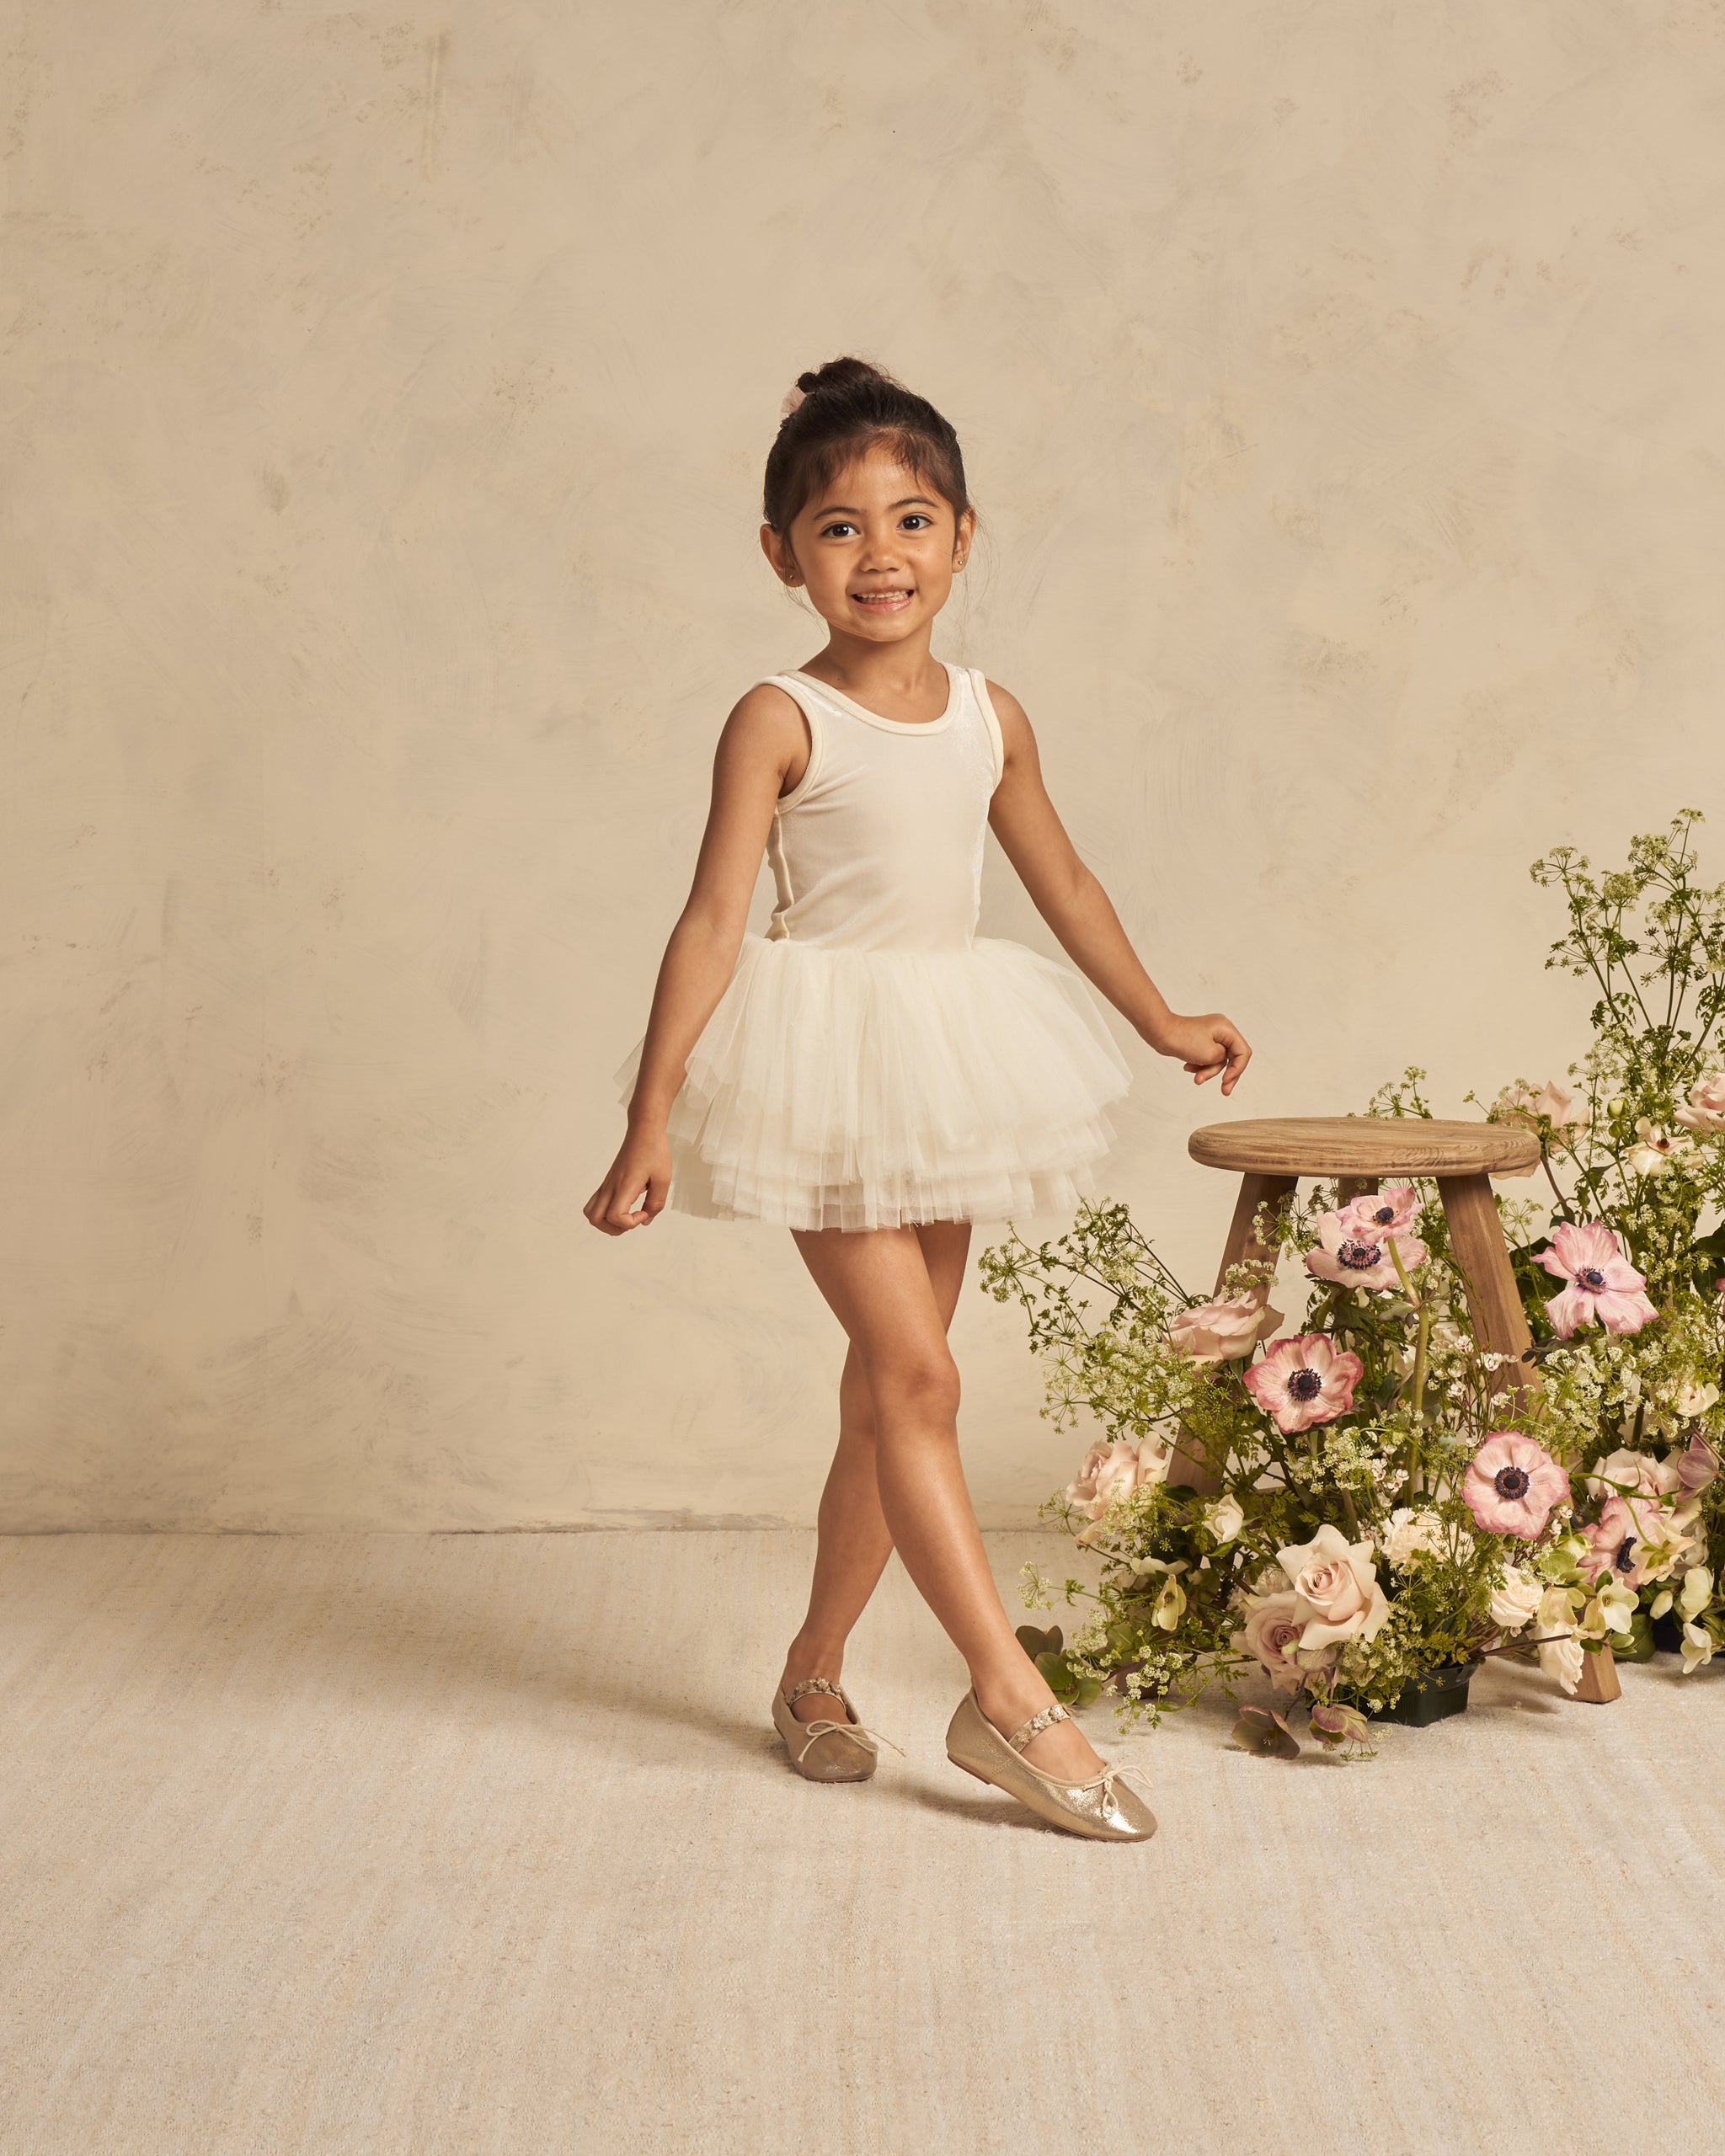 Tallulah Tutu || Ivory - Rylee + Cru | Kids Clothes | Trendy Baby Clothes | Modern Infant Outfits |